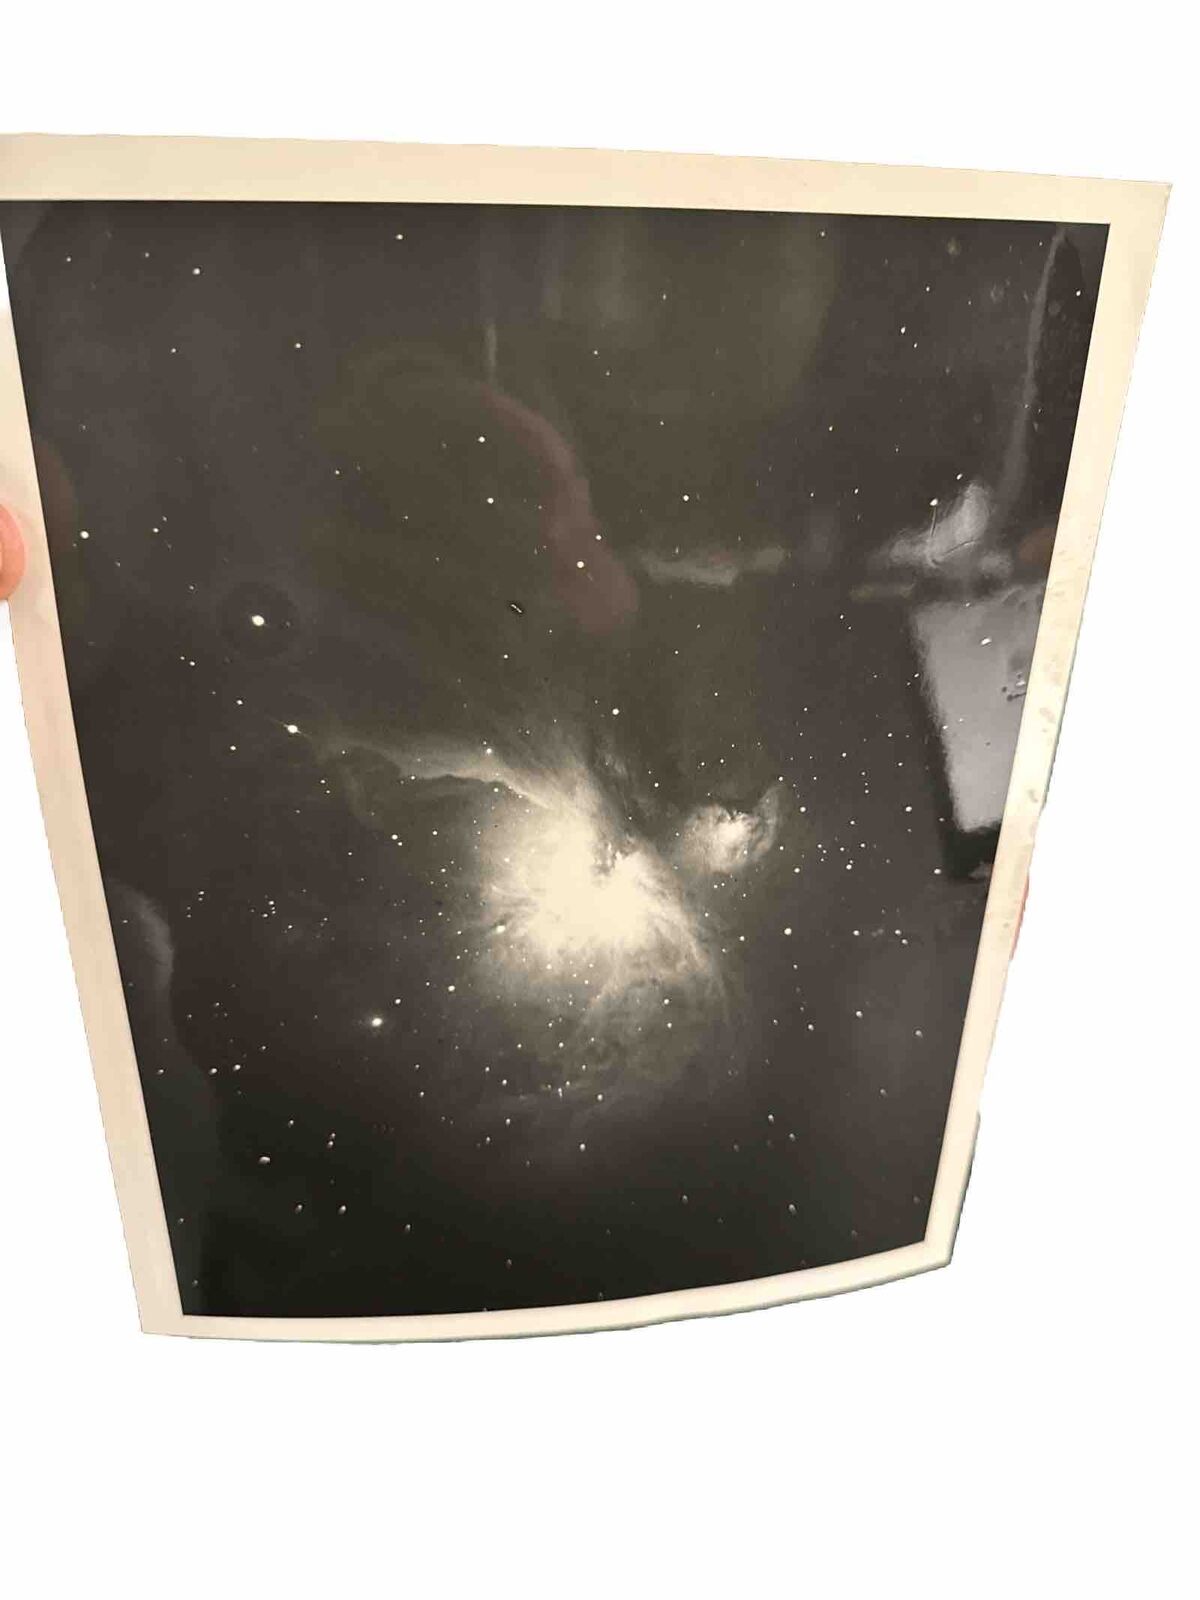 Vintage Orion Nebula Planetarium Photograph 1959 with 12” Zeiss Lens over 40 Min